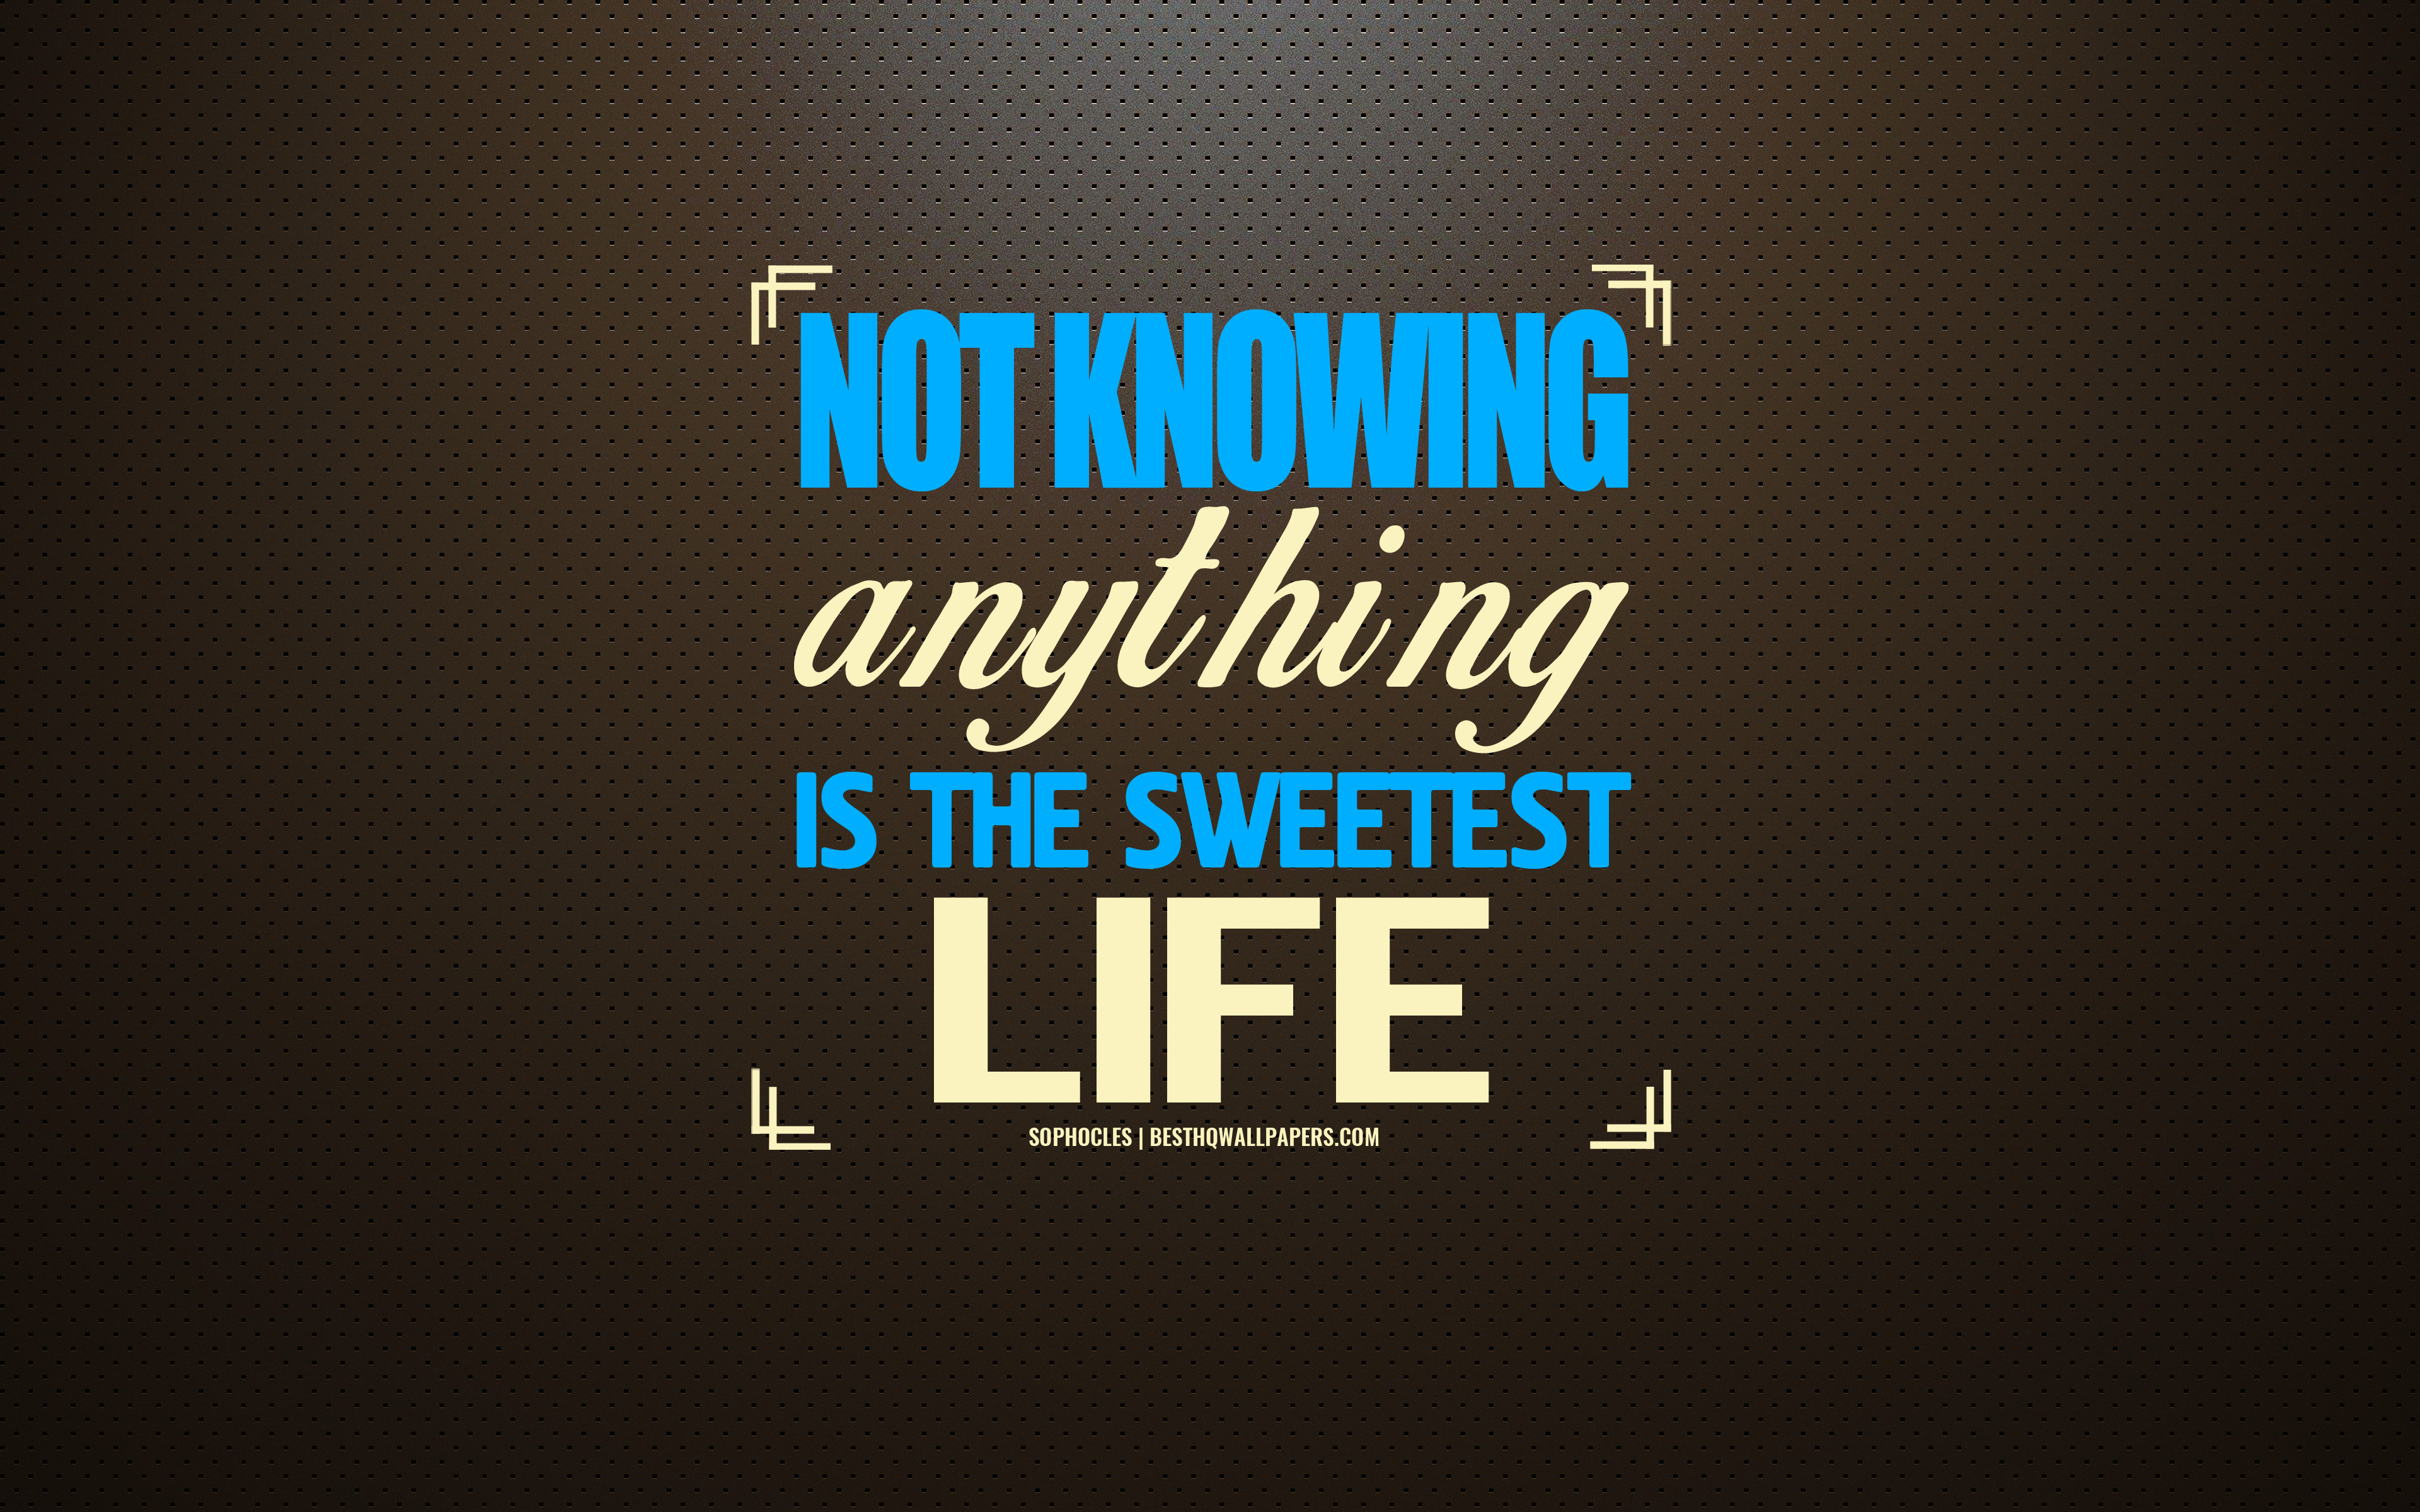 Download wallpaper Not knowing anything is the sweetest life